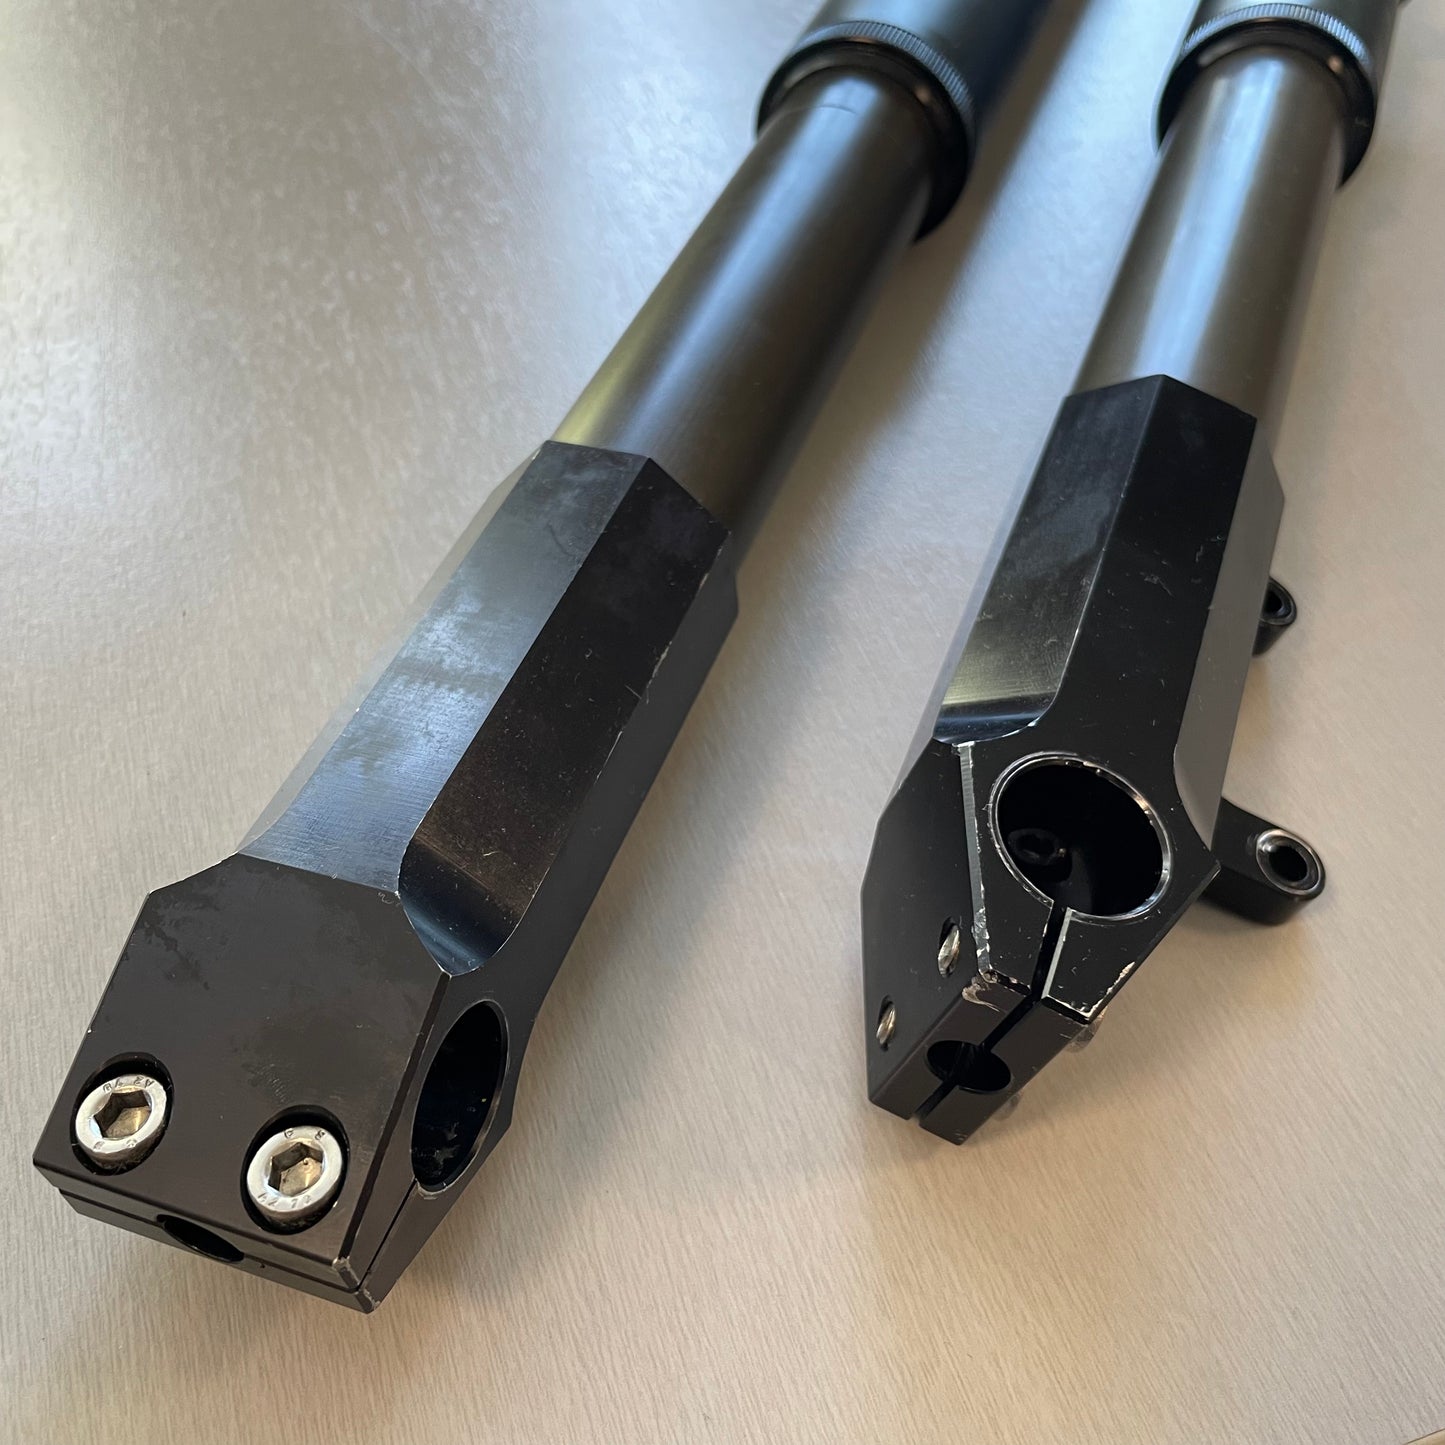 Maintenance of Votec up site down suspension fork with elastomers, seals and bushings